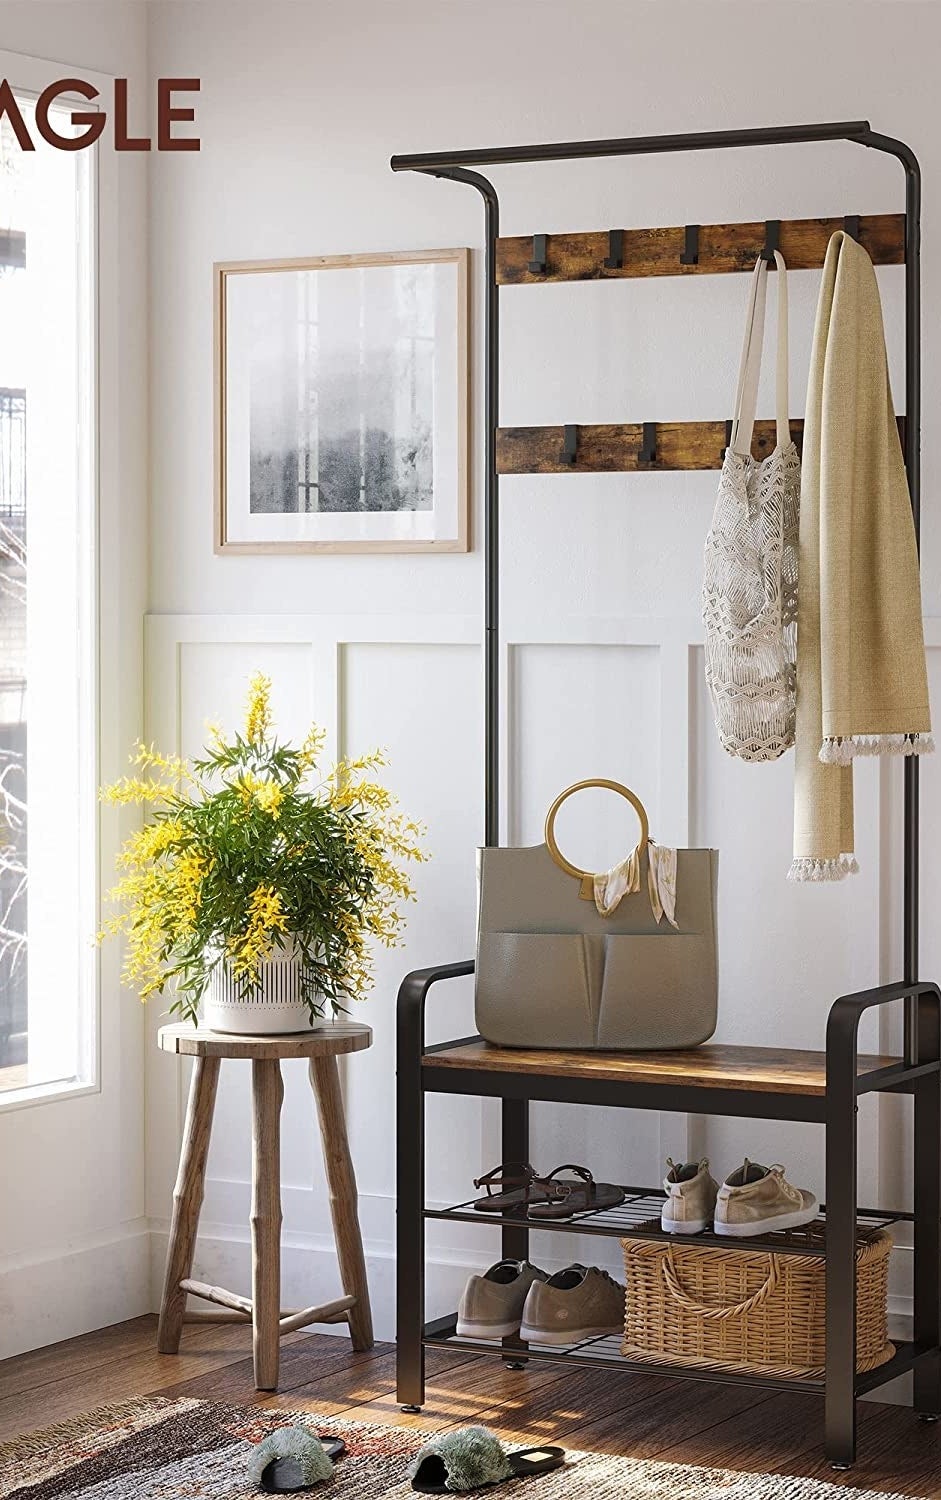 The coat rack with shoes, a tote bag, and some scarves hanging from it, next to an accent table with a plant on it